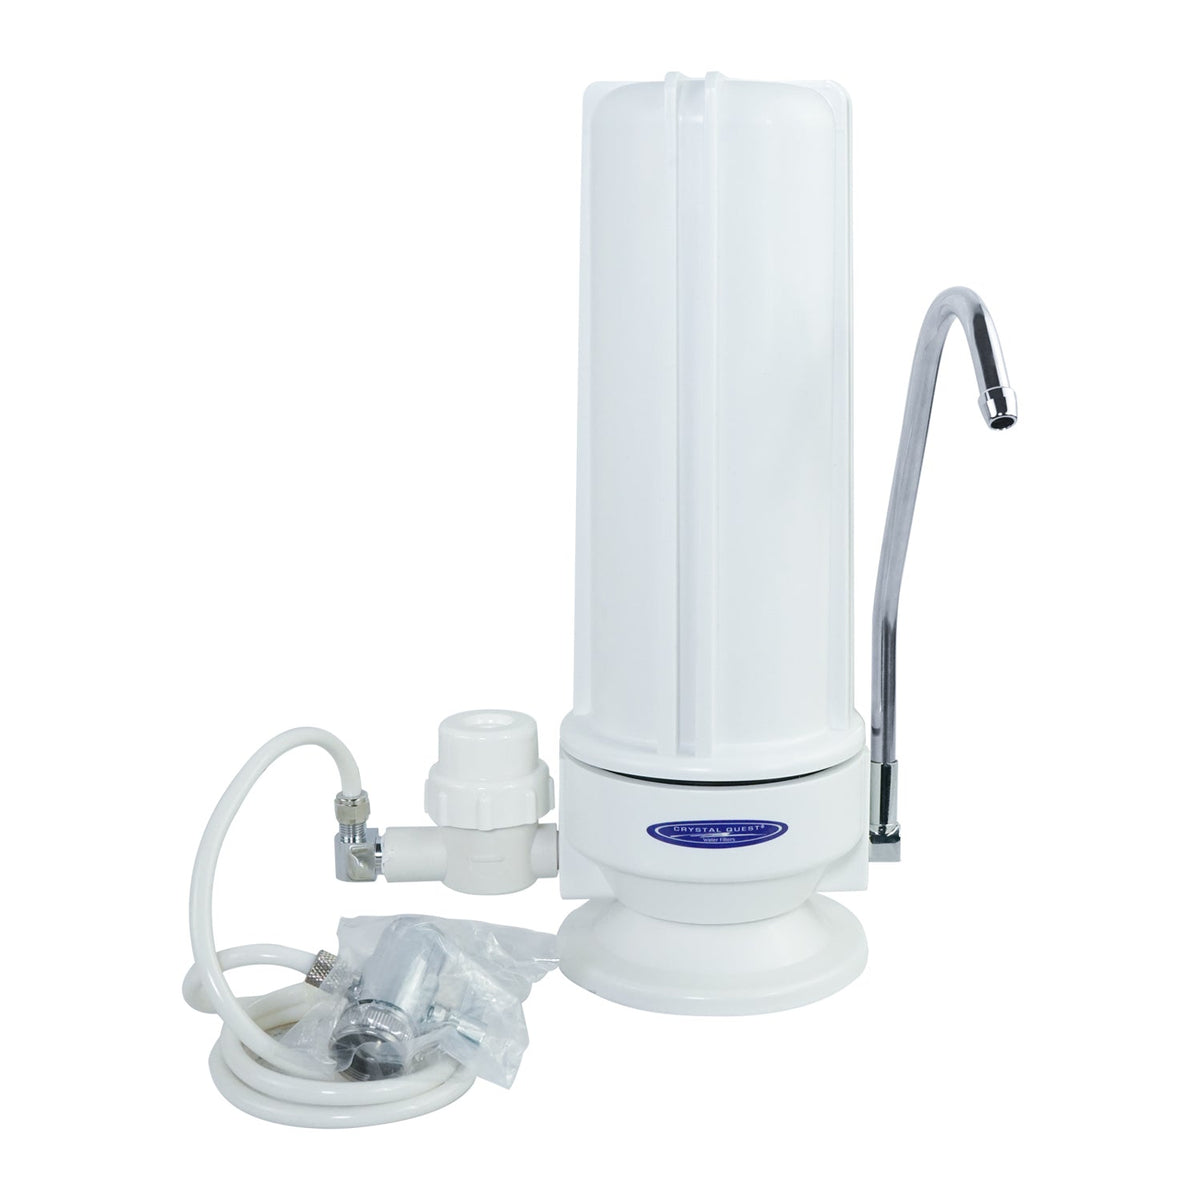 SMART Countertop Water Filter System - Countertop Water Filters - Crystal Quest